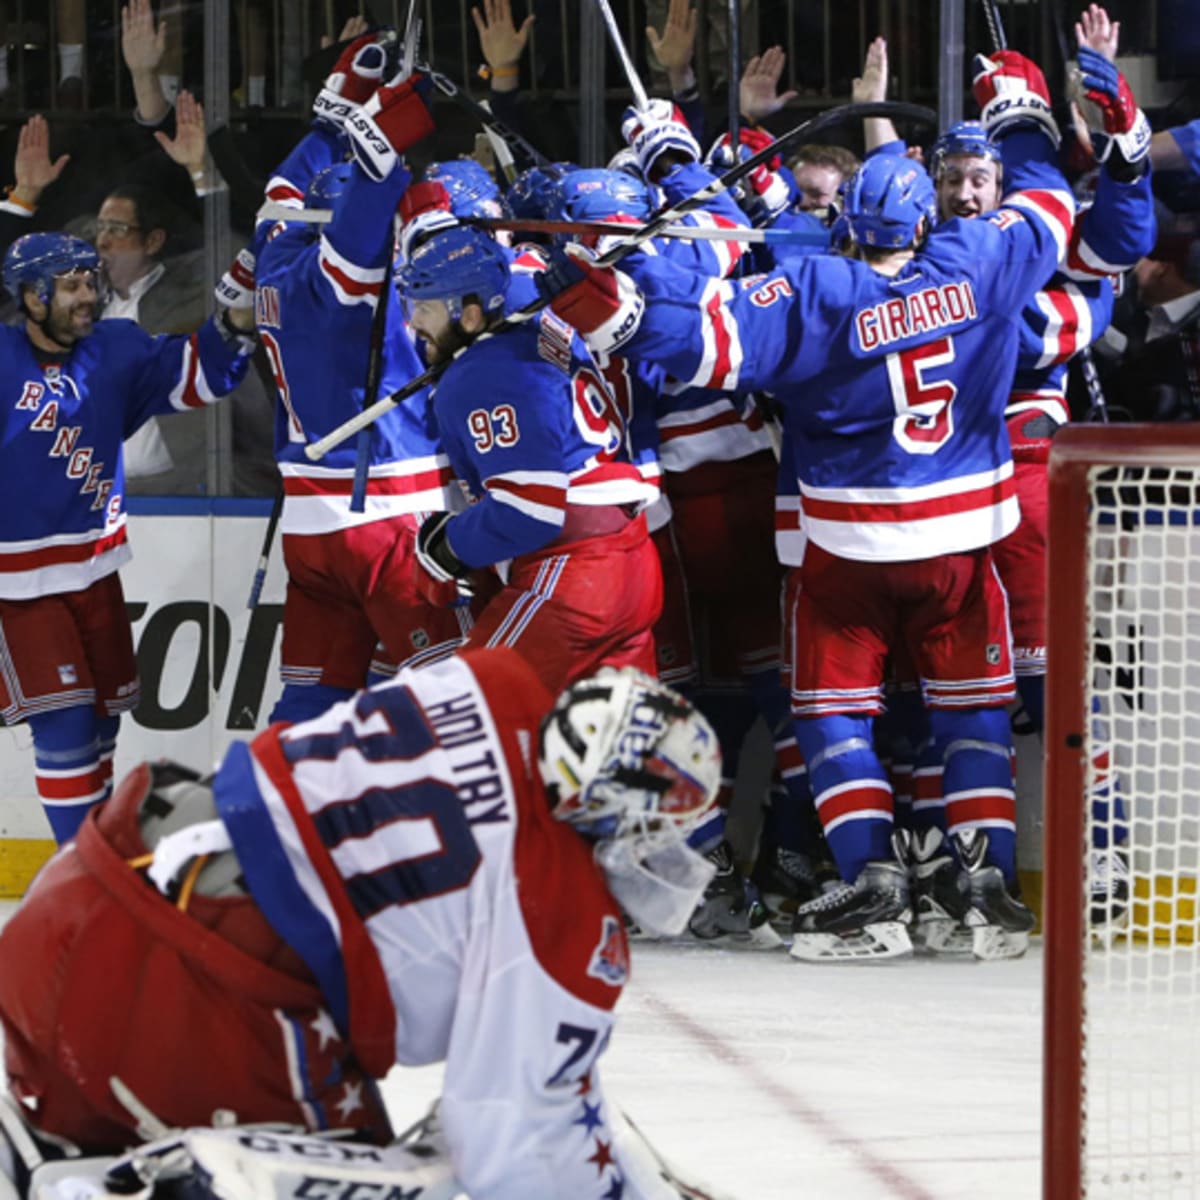 Capitals playoff hopes vanishing after 5-2 loss to Rangers